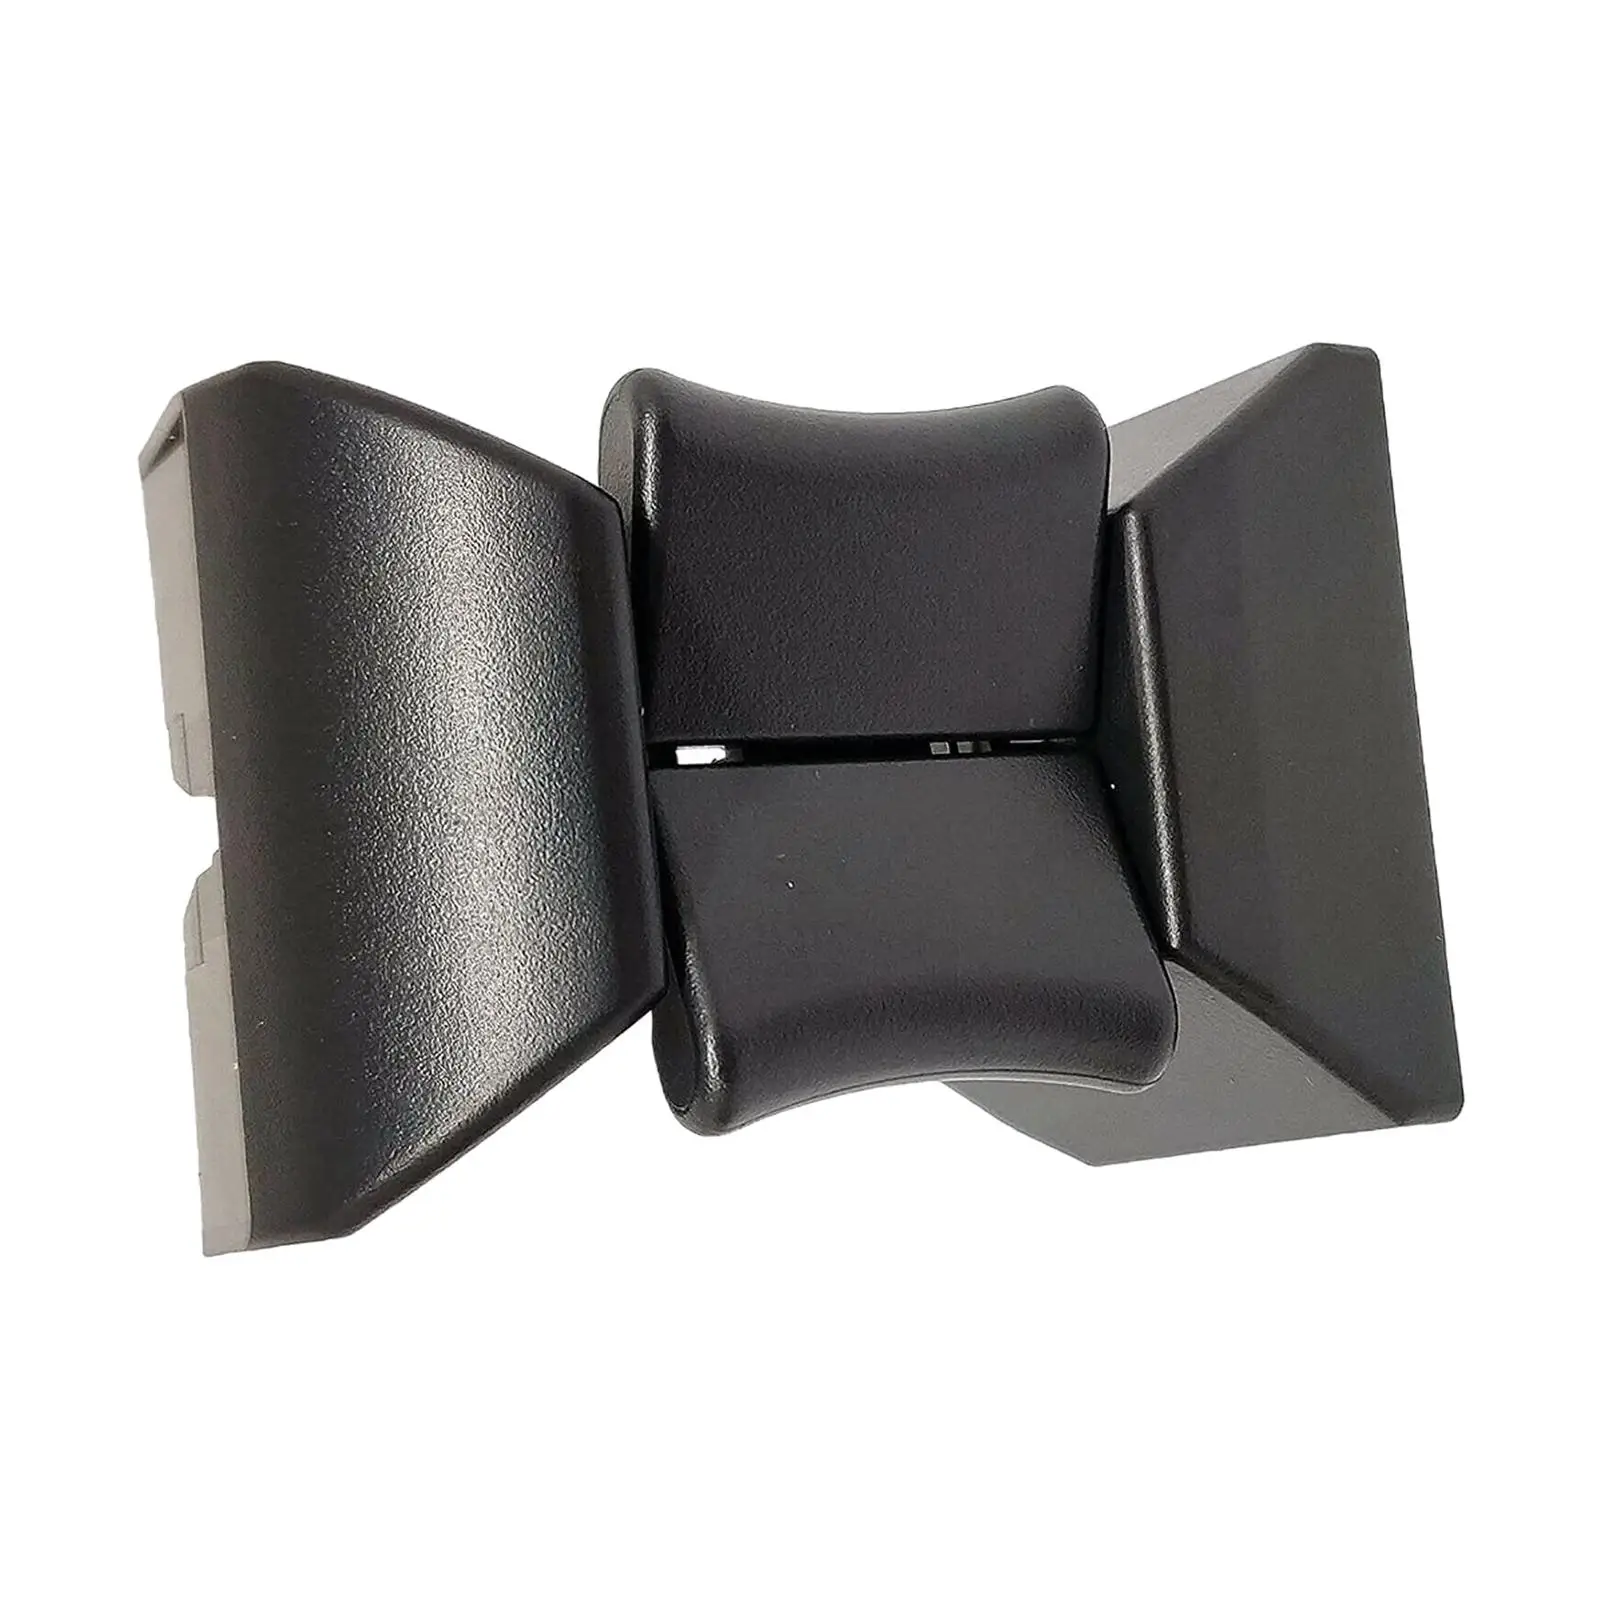 Center Console Cup Holder Insert Fits for Lexus Accessories Parts